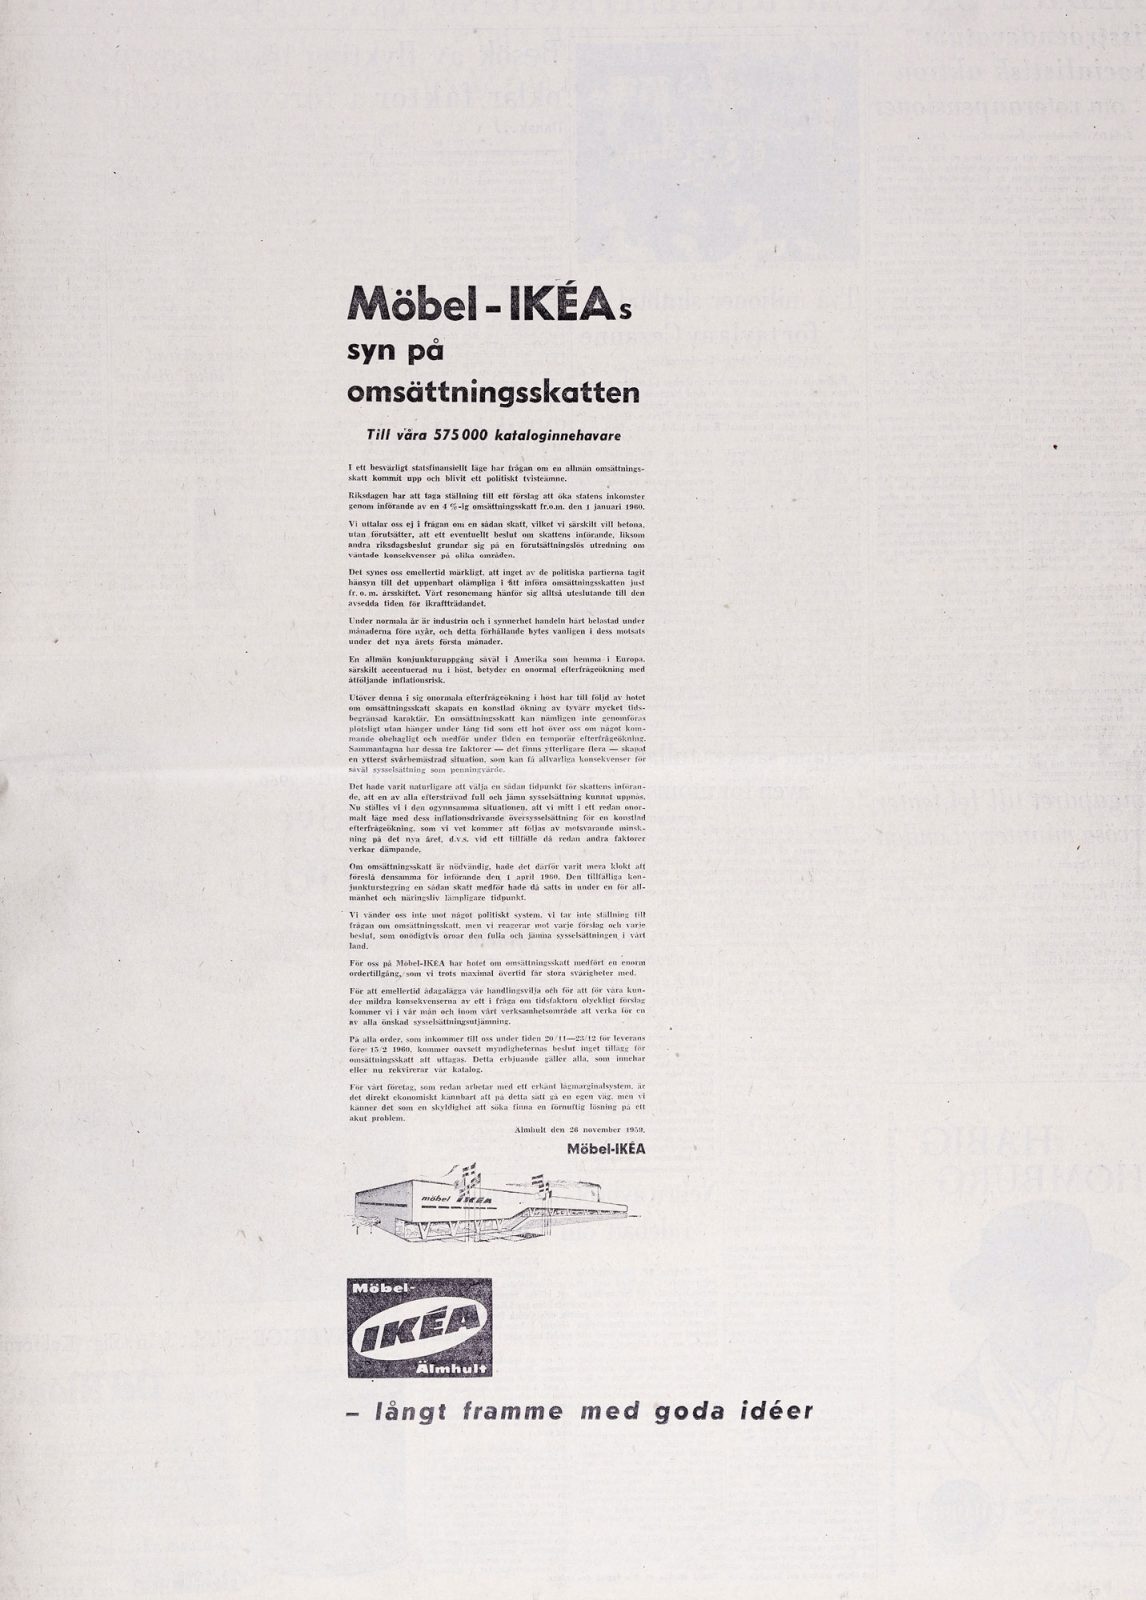 Black and white ad with a drawing of the IKEA store in Älmhult, headline 